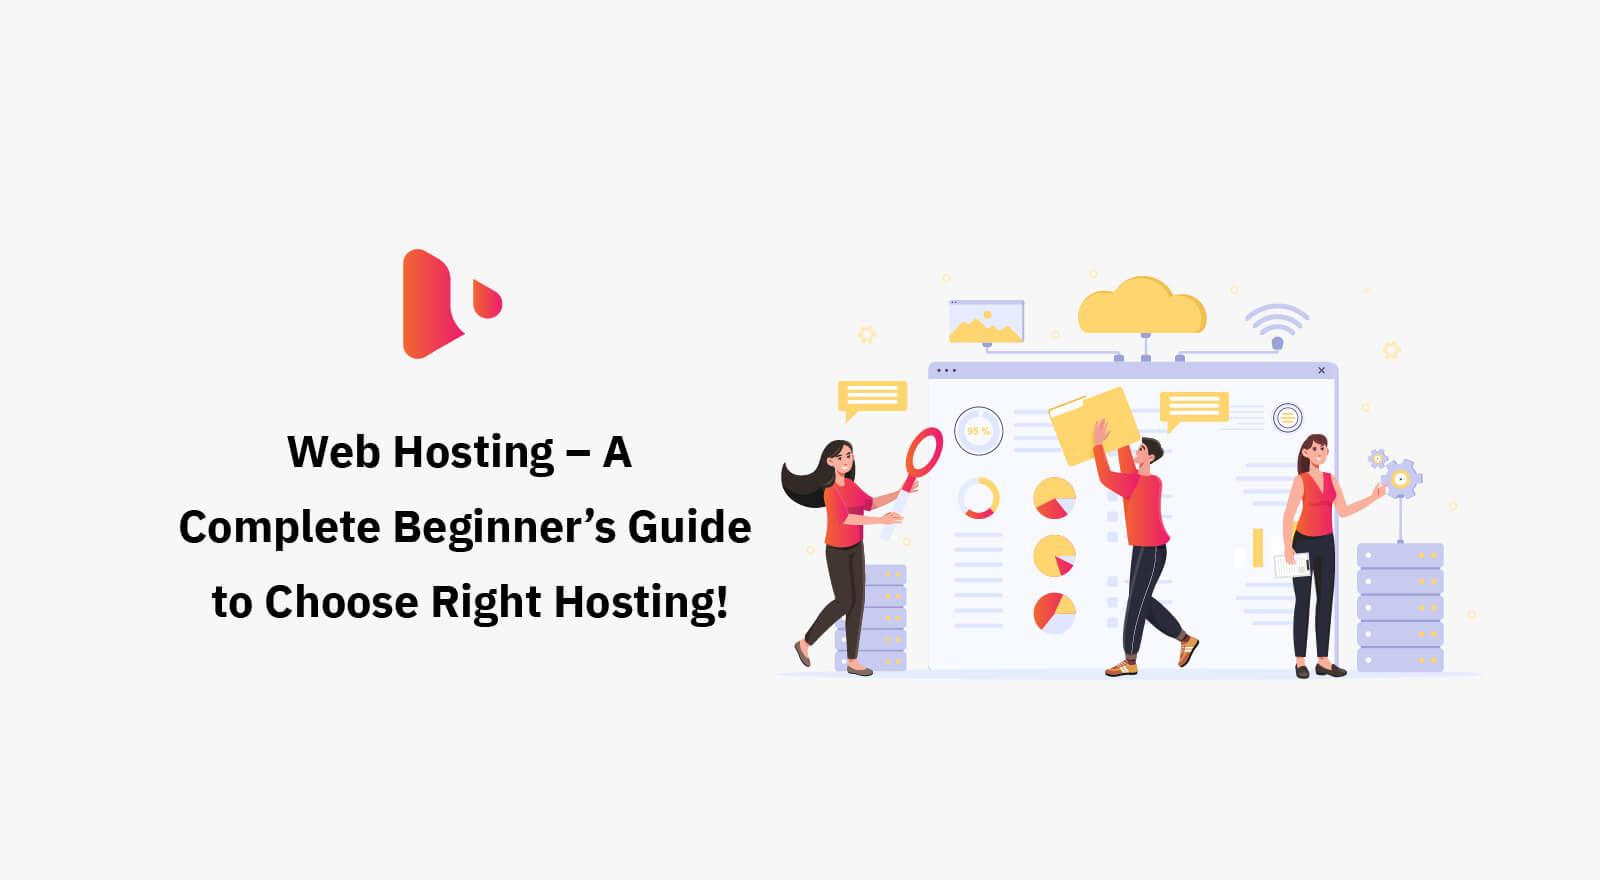 Web Hosting – A Complete Beginner’s Guide to Choose Right Hosting!